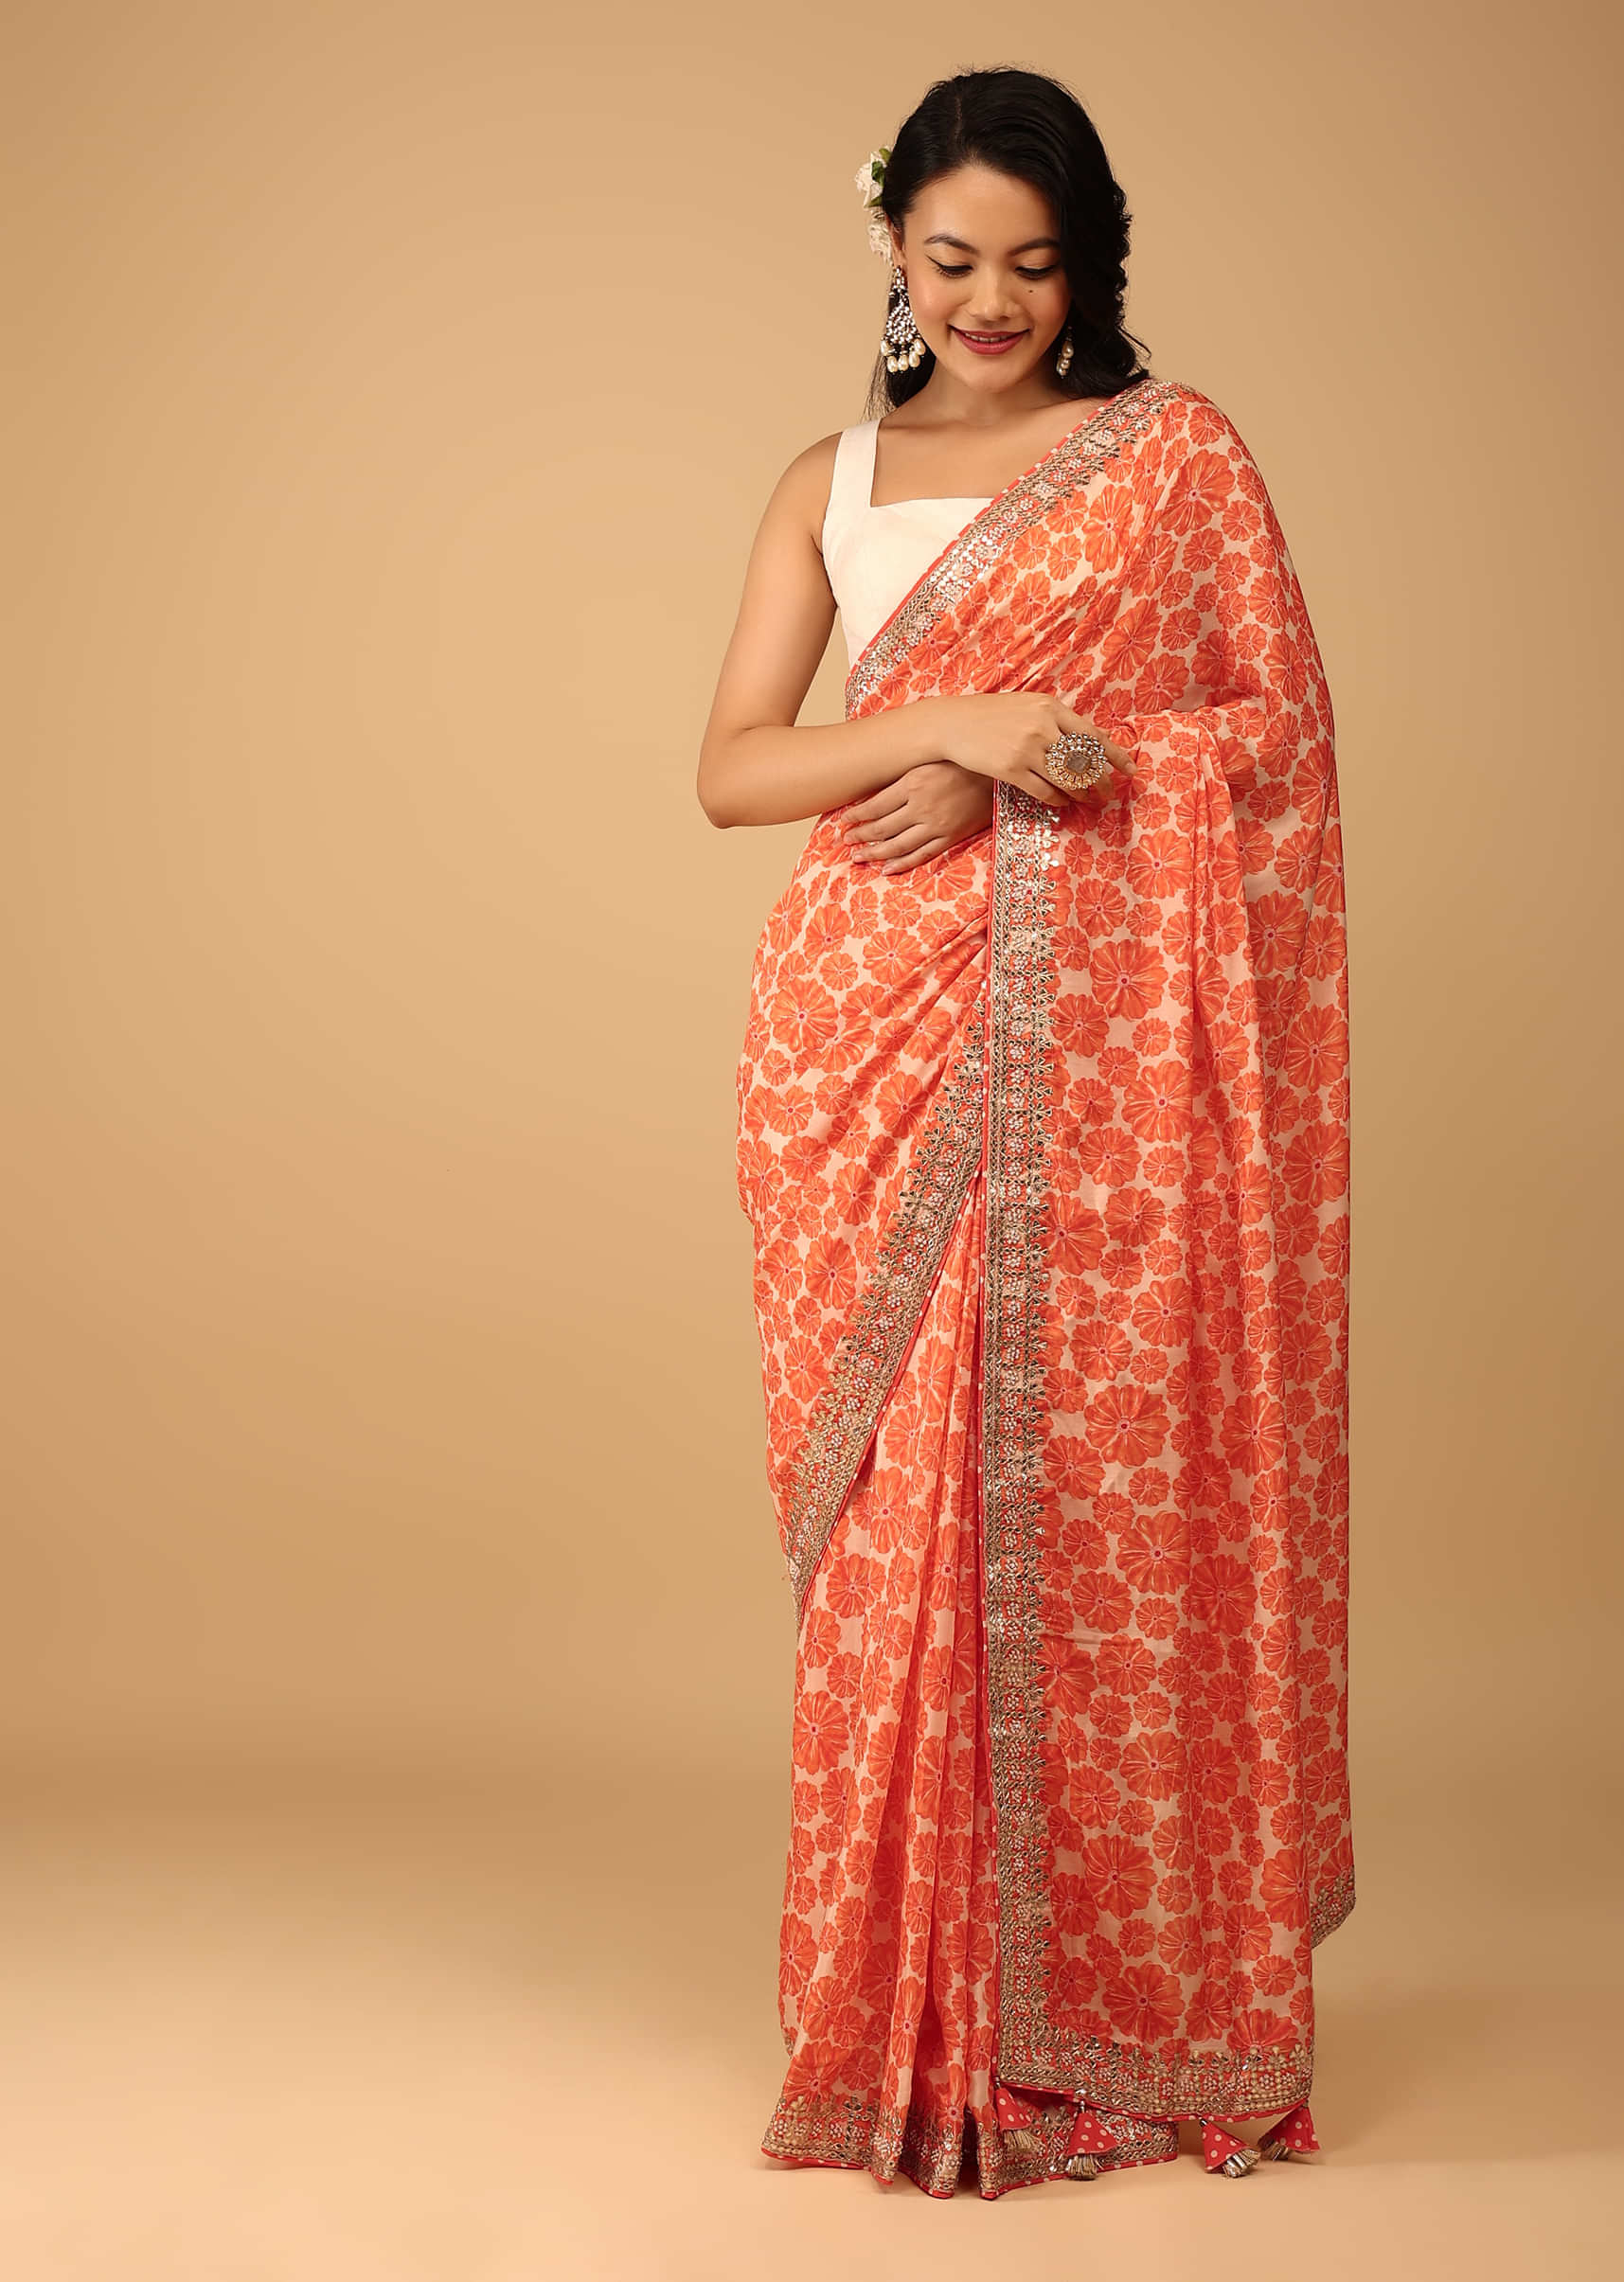 Kalki Hot Coral Orange Saree In Muslin With Floral Handblock Print And Embroidery